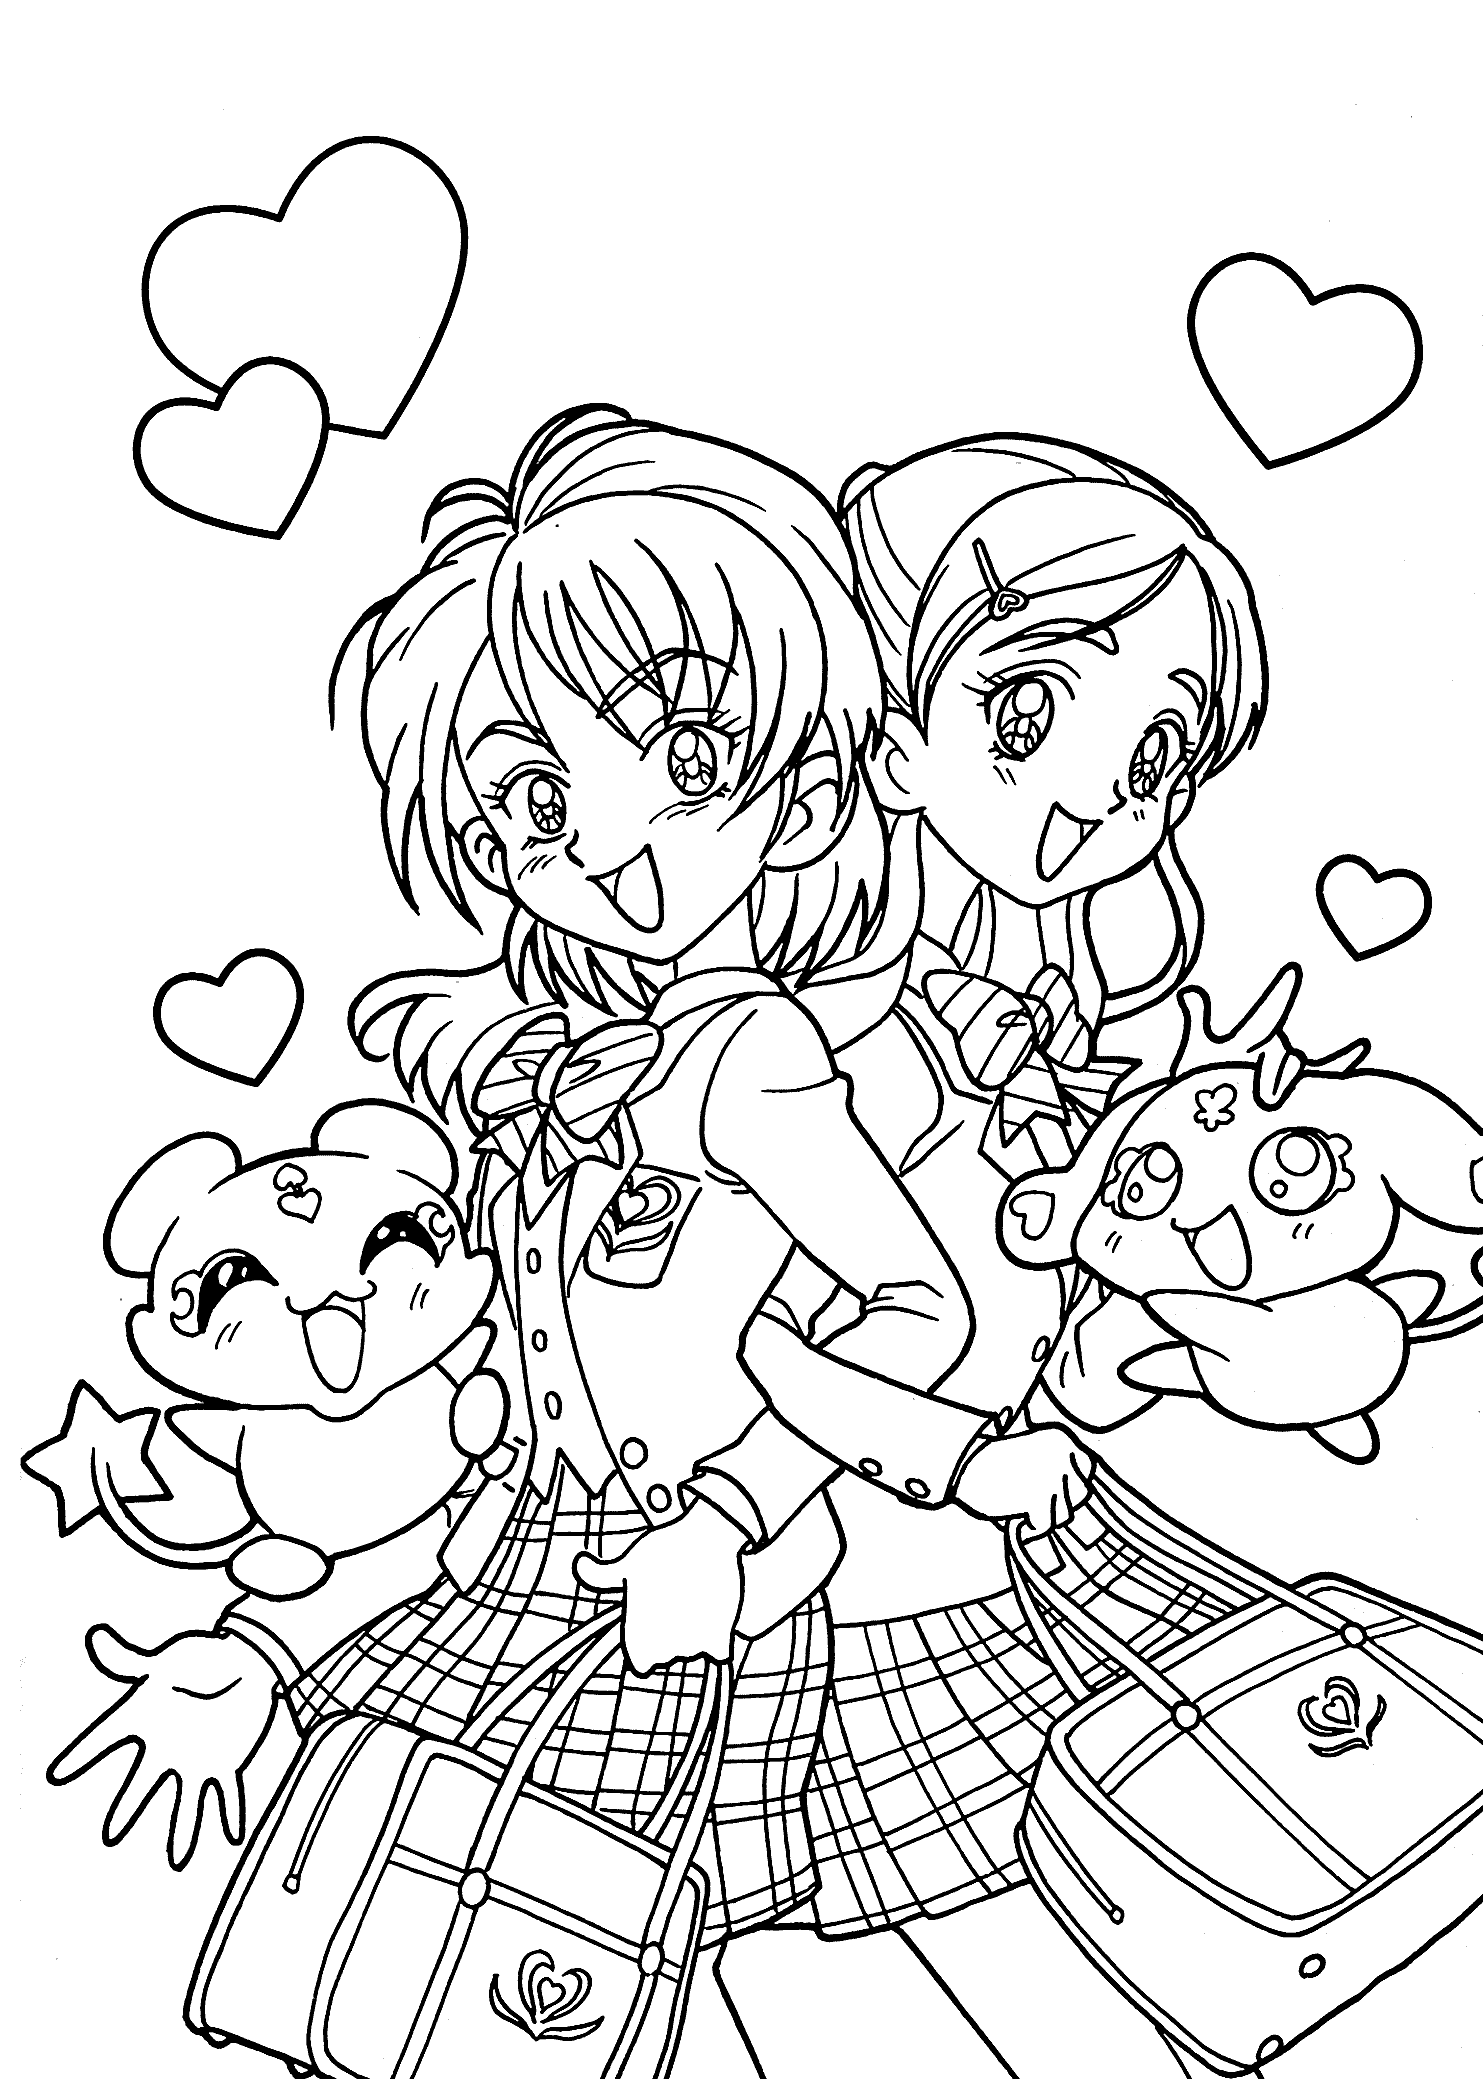 coloring pages manga manga coloring pages to download and print for free manga coloring pages 